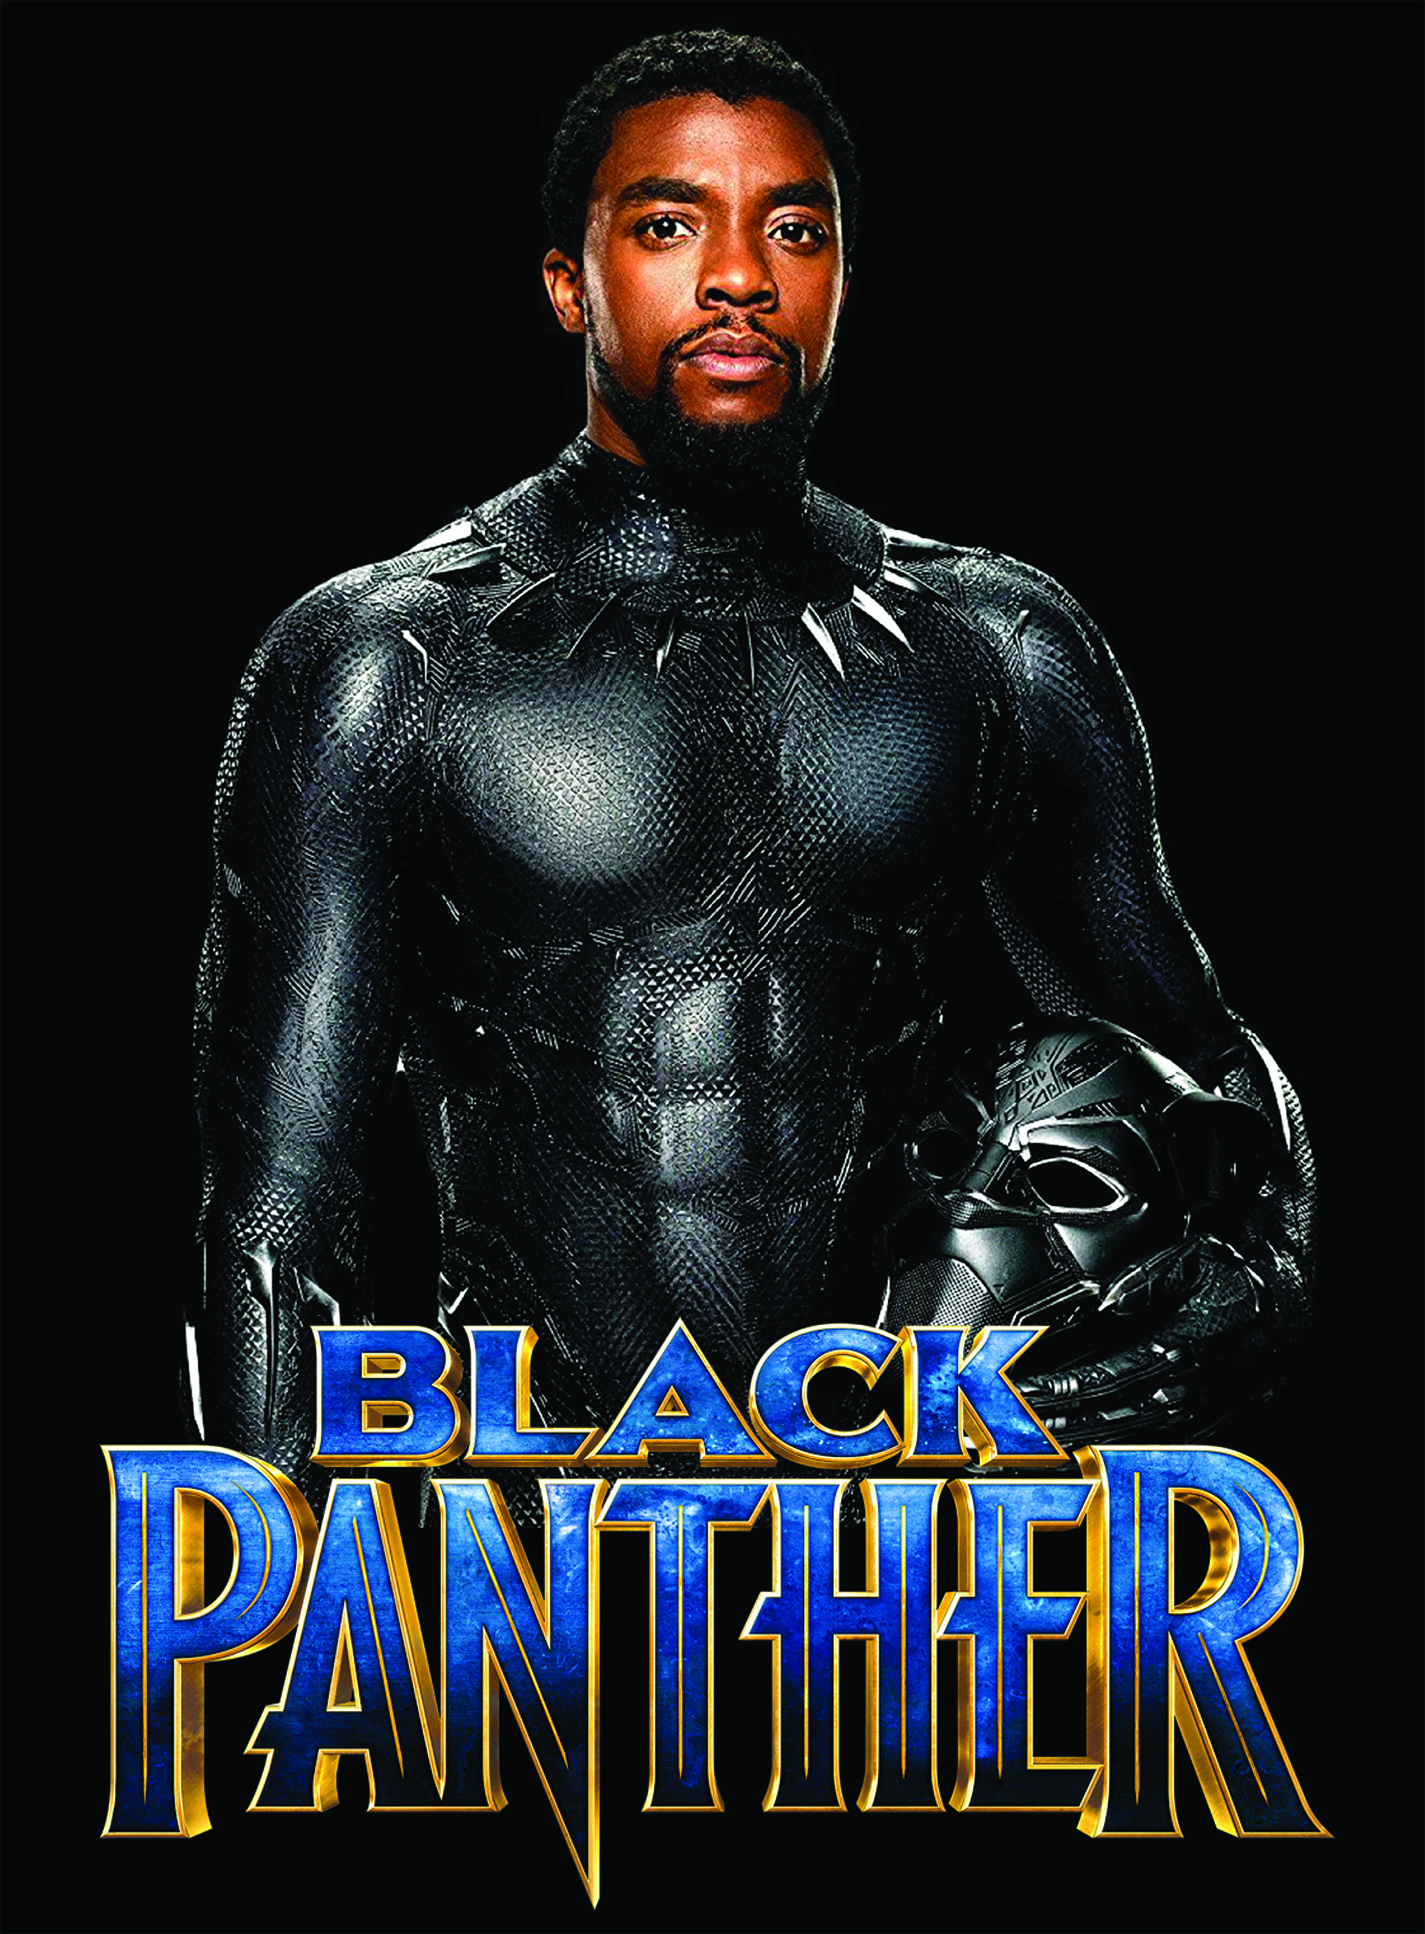 King T’Challa for Black Panther.